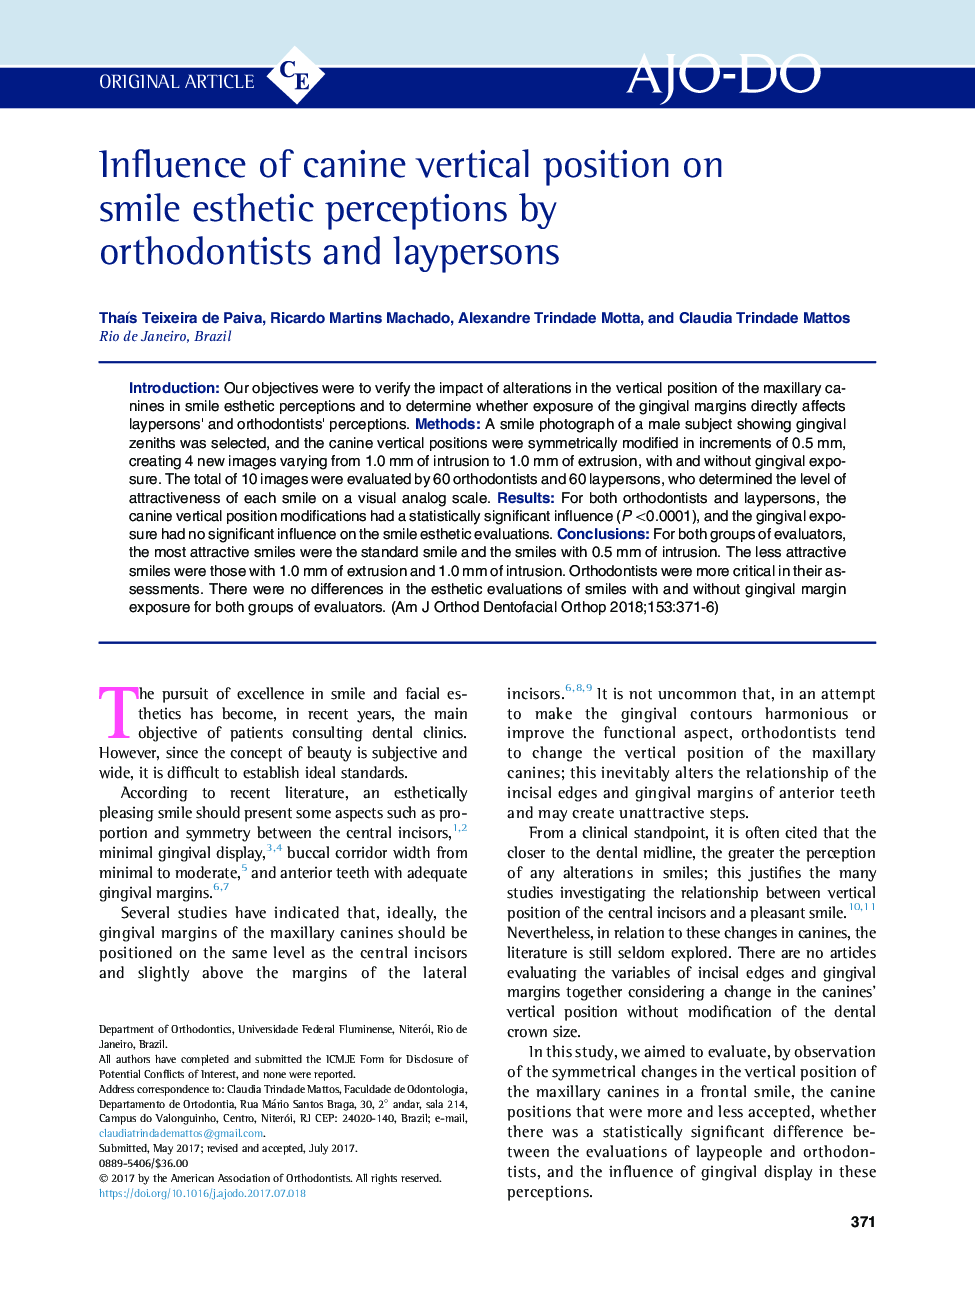 Influence of canine vertical position on smile esthetic perceptions by orthodontists and laypersons